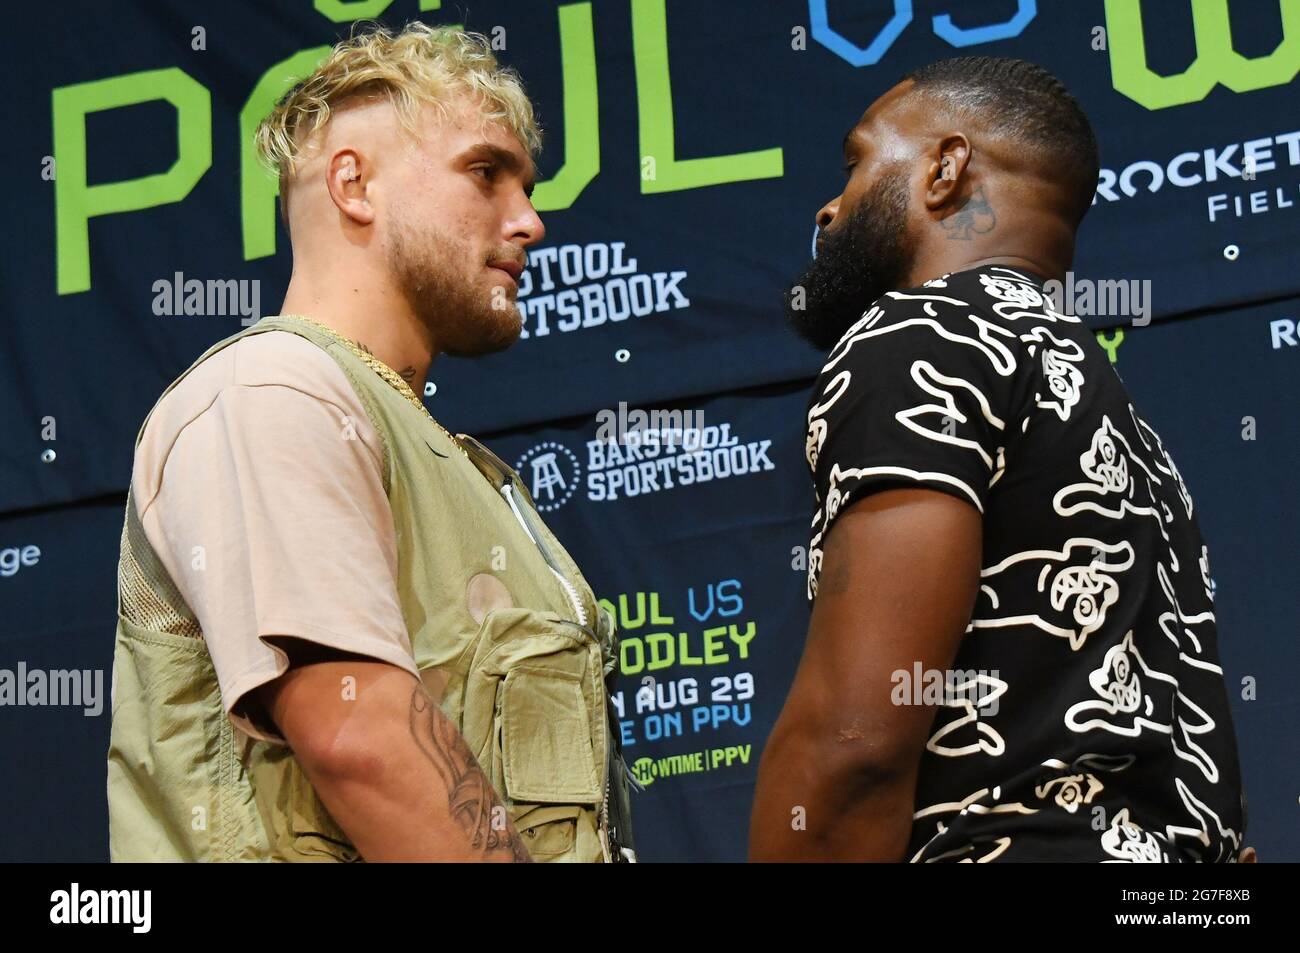 Los Angeles, USA. 13th July, 2021. (L-R) Jake Paul and Tyron Woodley at the JAKE PAUL VS. TYRON WOODLEY Los Angeles Press Conference held at The Novo at L.A. LIVE in Los Angeles, CA on Tuesday, ?July 13, 2021. (Photo By Sthanlee B. Mirador/Sipa USA) Credit: Sipa USA/Alamy Live News Stock Photo